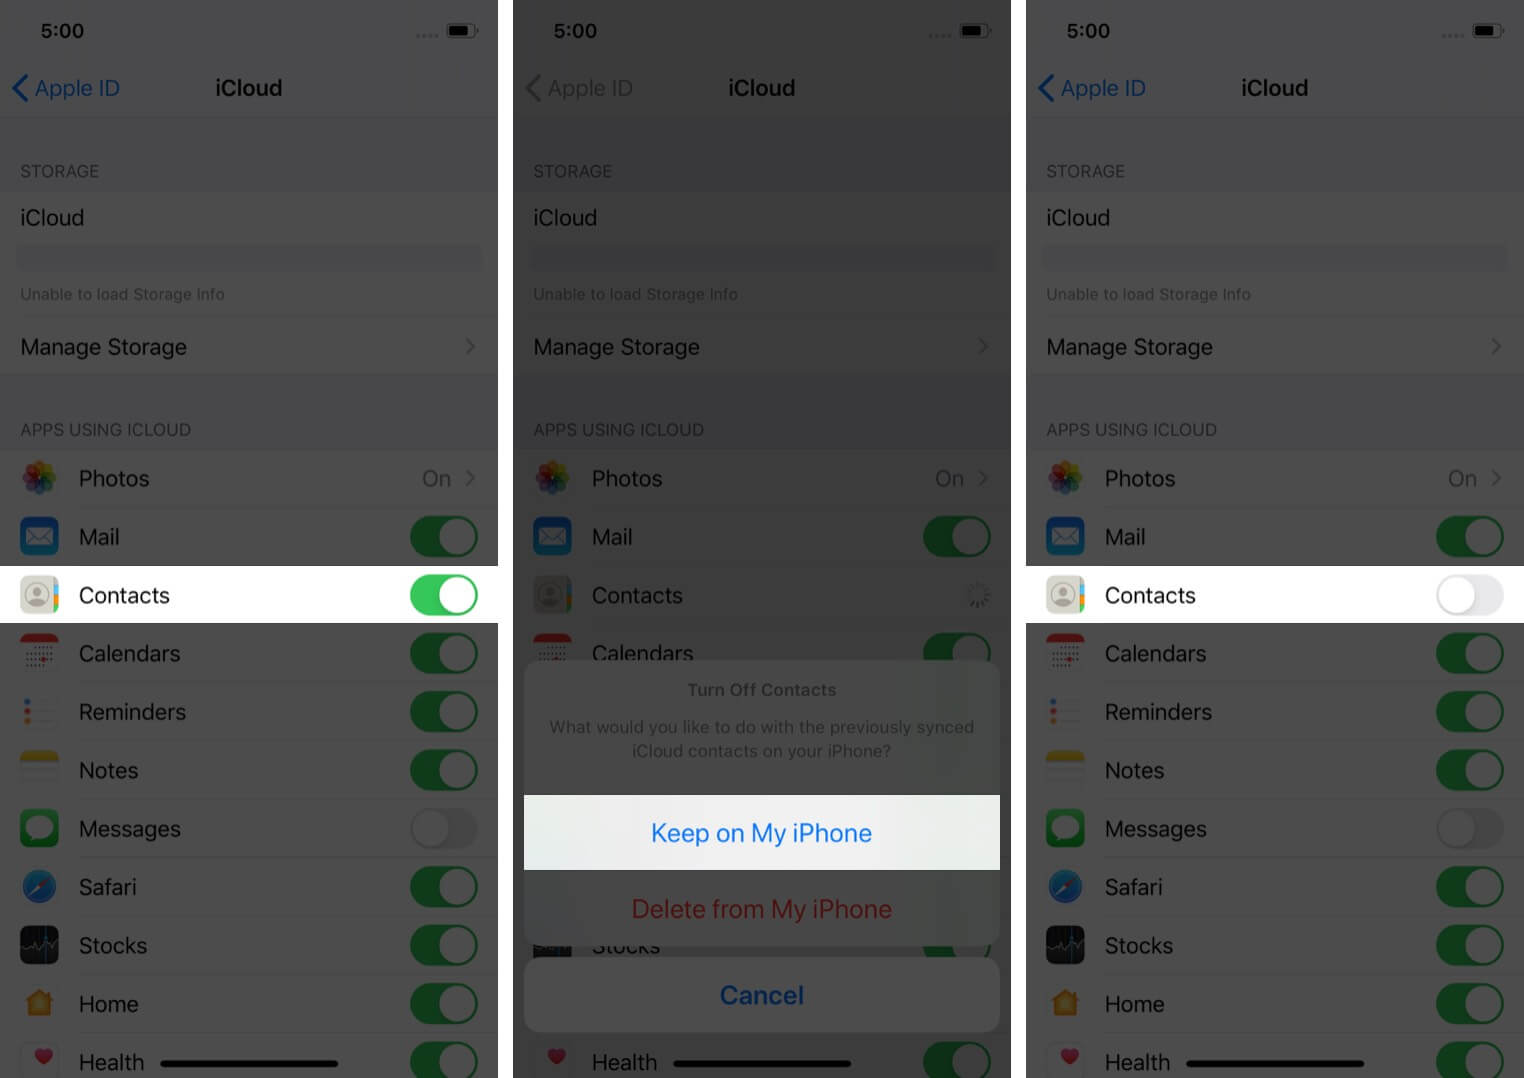 turn off contacts in icloud in iphone settings